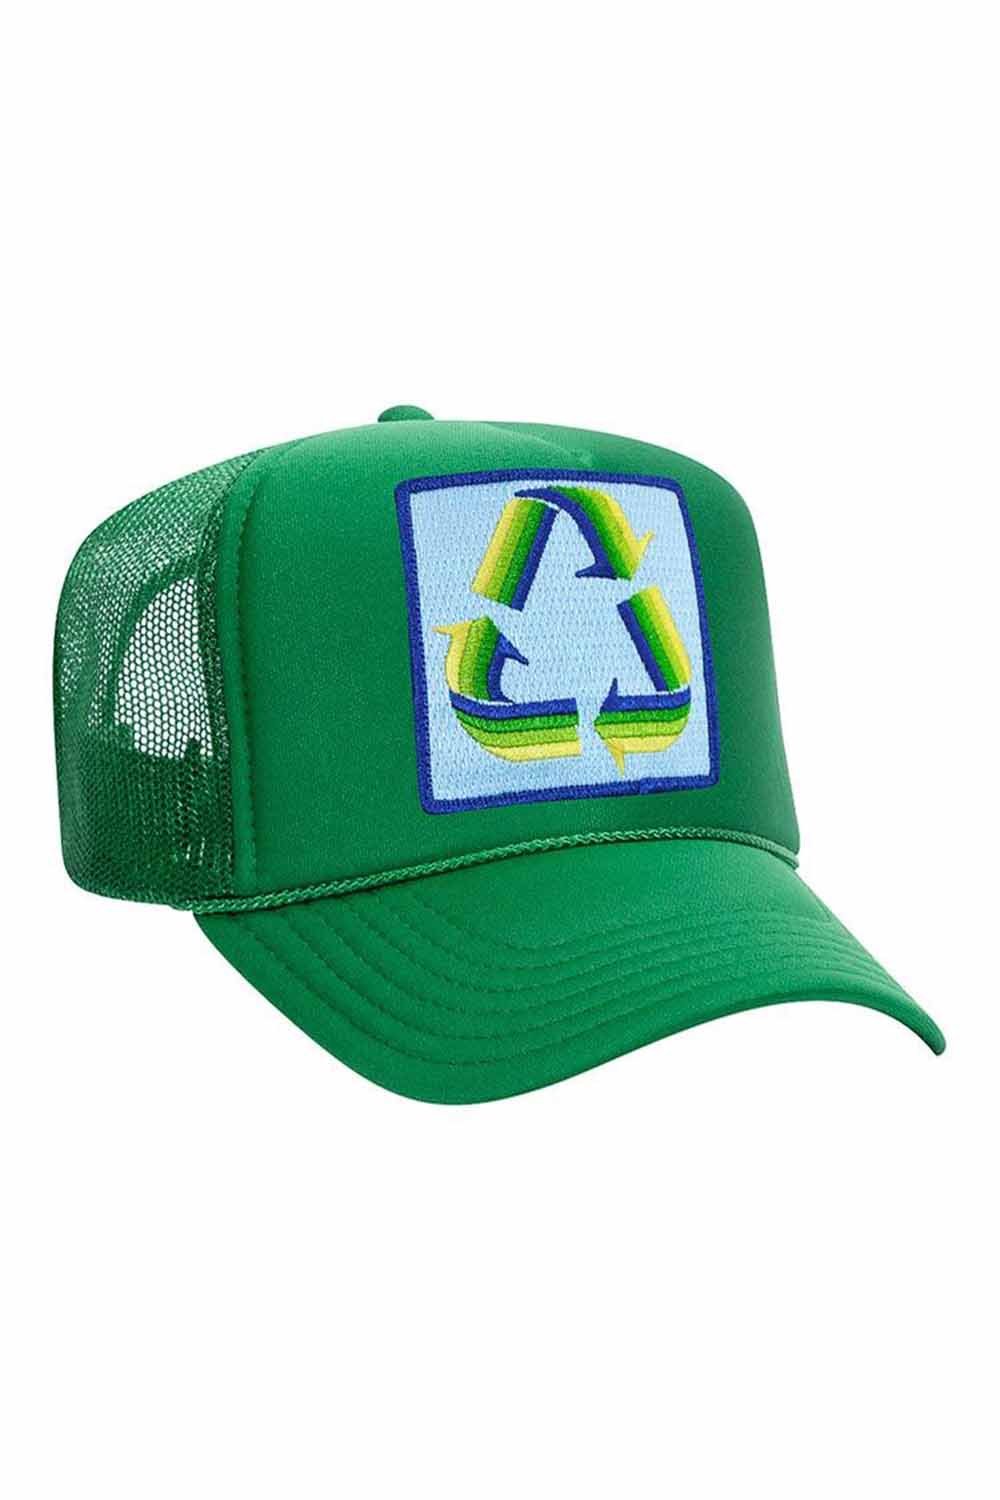 RECYCLE TRUCKER HAT HATS Aviator Nation OS KELLY GREEN 